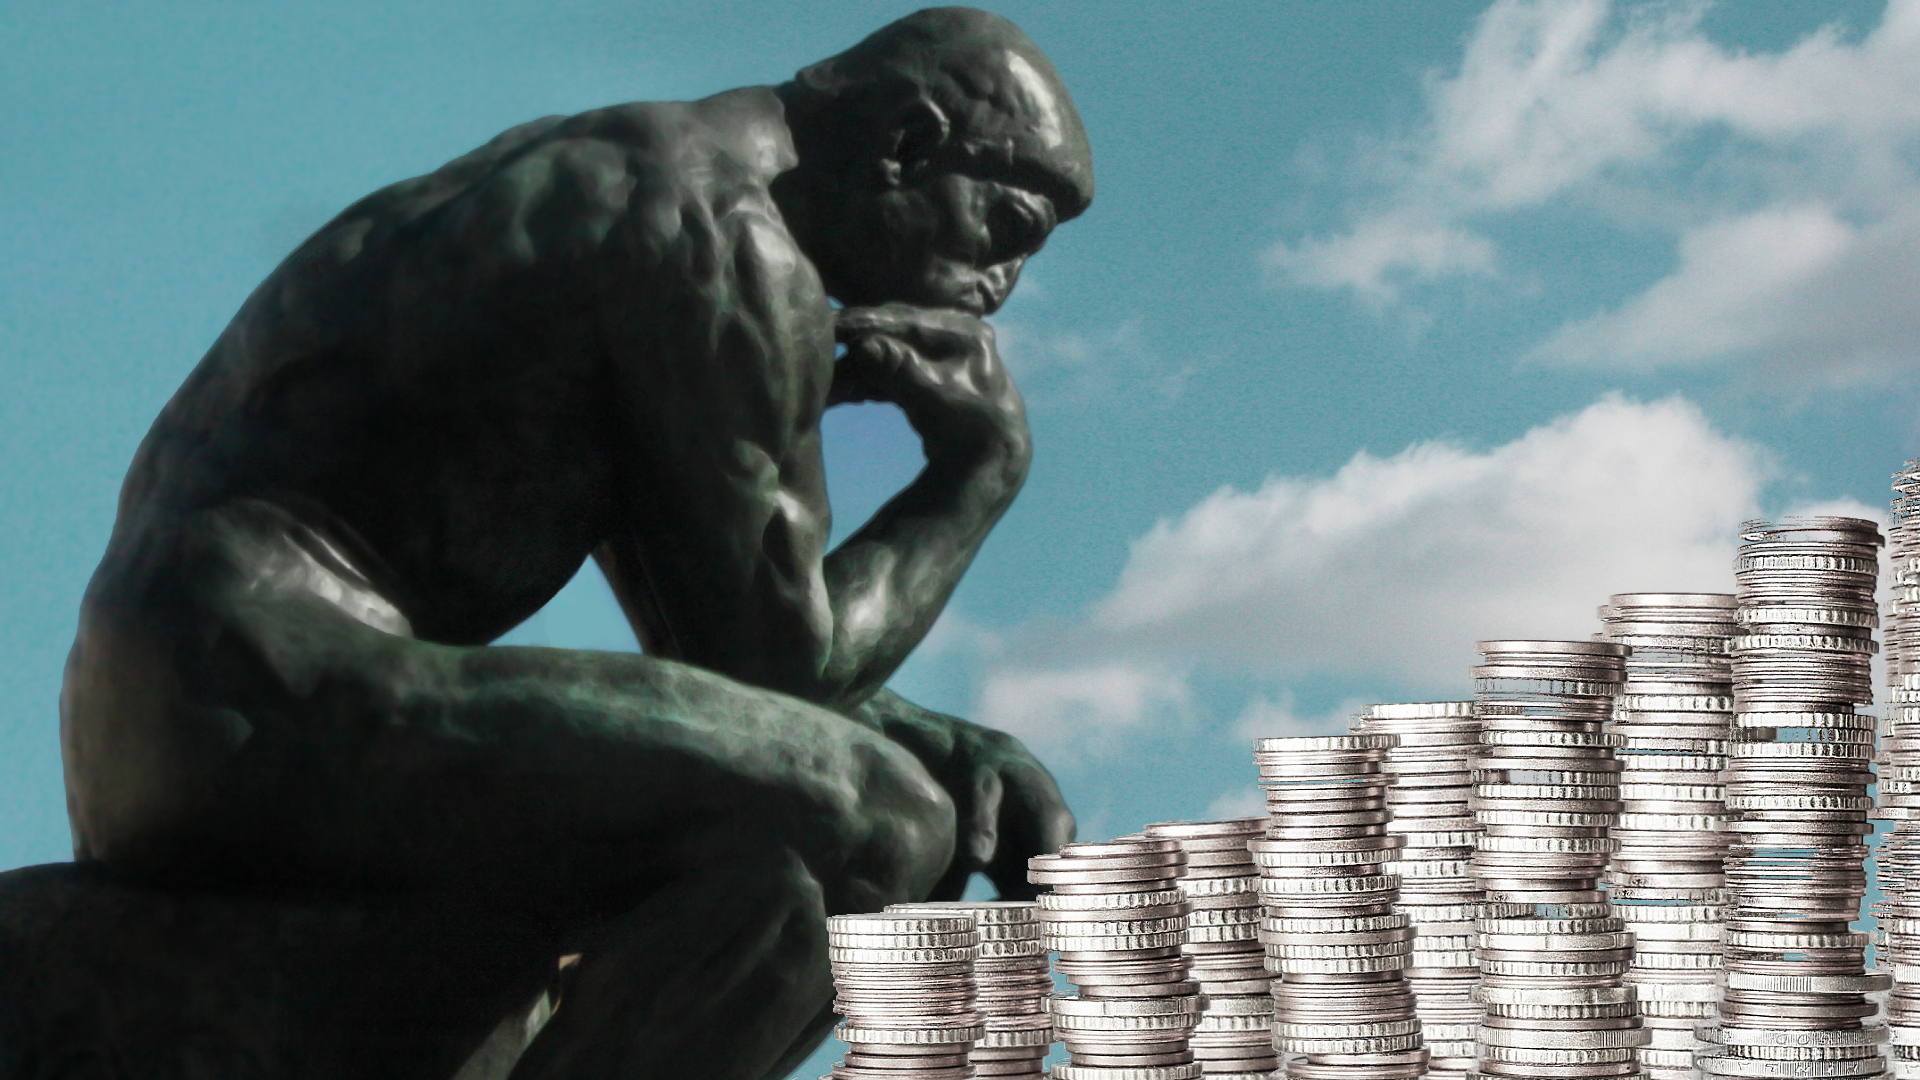 a statue of a man sitting in front of stacks of coins.